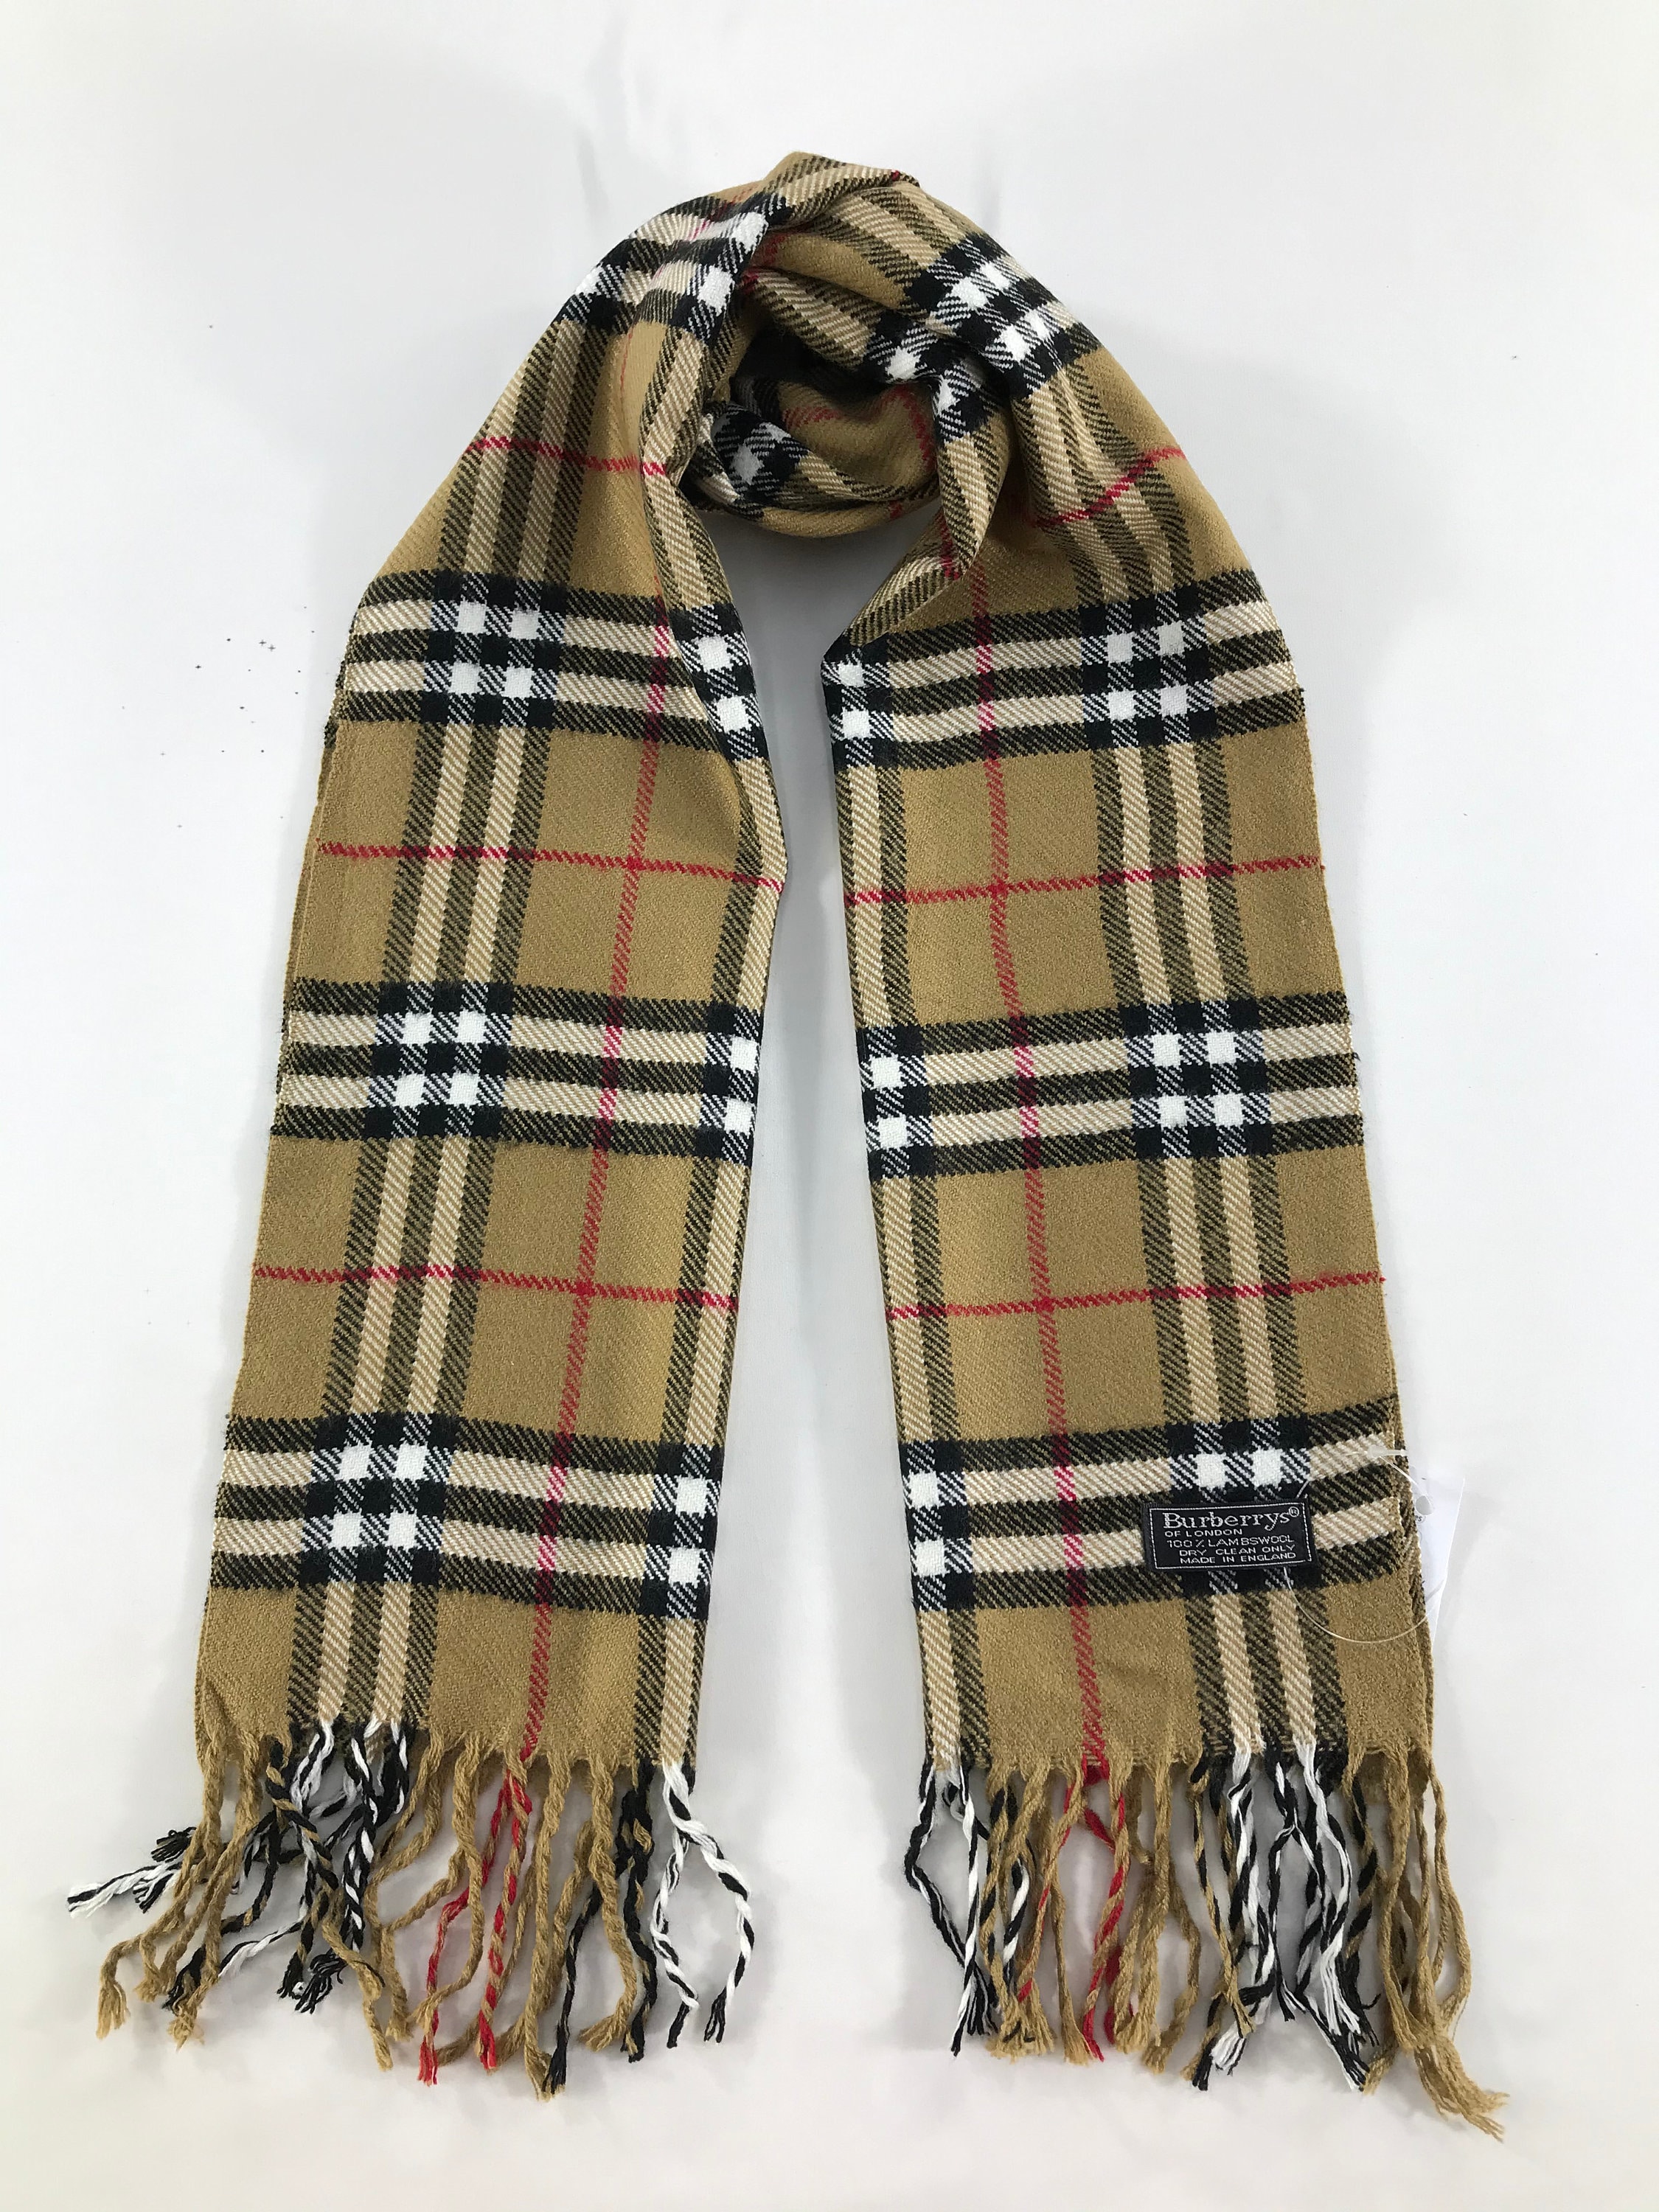 Vintage Burberry Scarf Luxury Accessories Wool Scarf Cashmere | Etsy